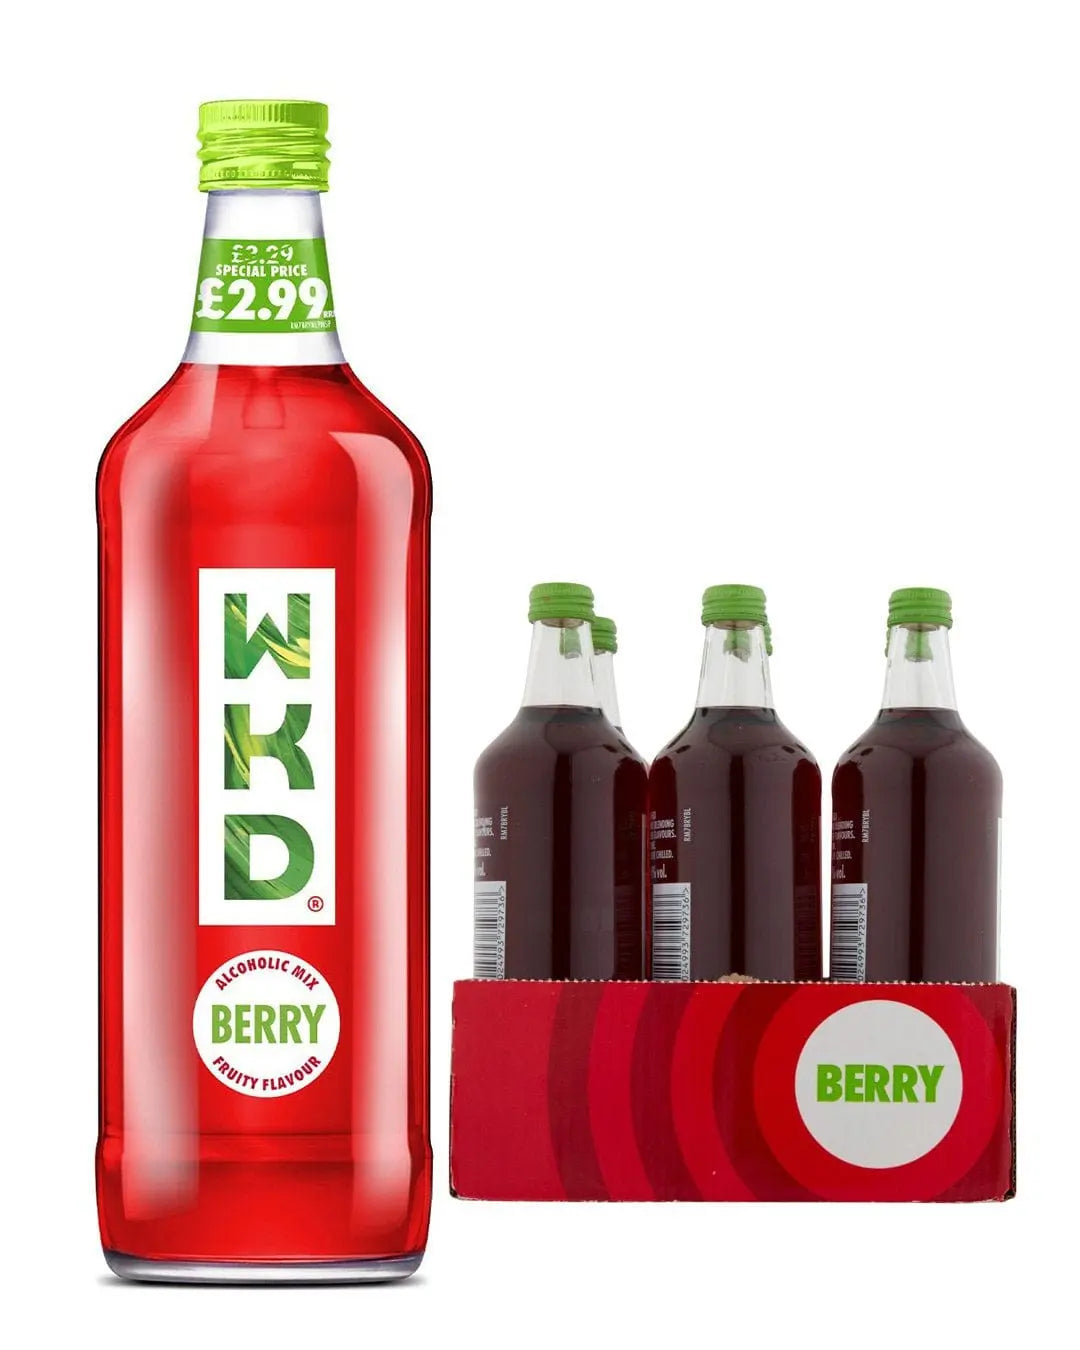 WKD Berry Multipack, 6 x 70 cl Ready Made Cocktails